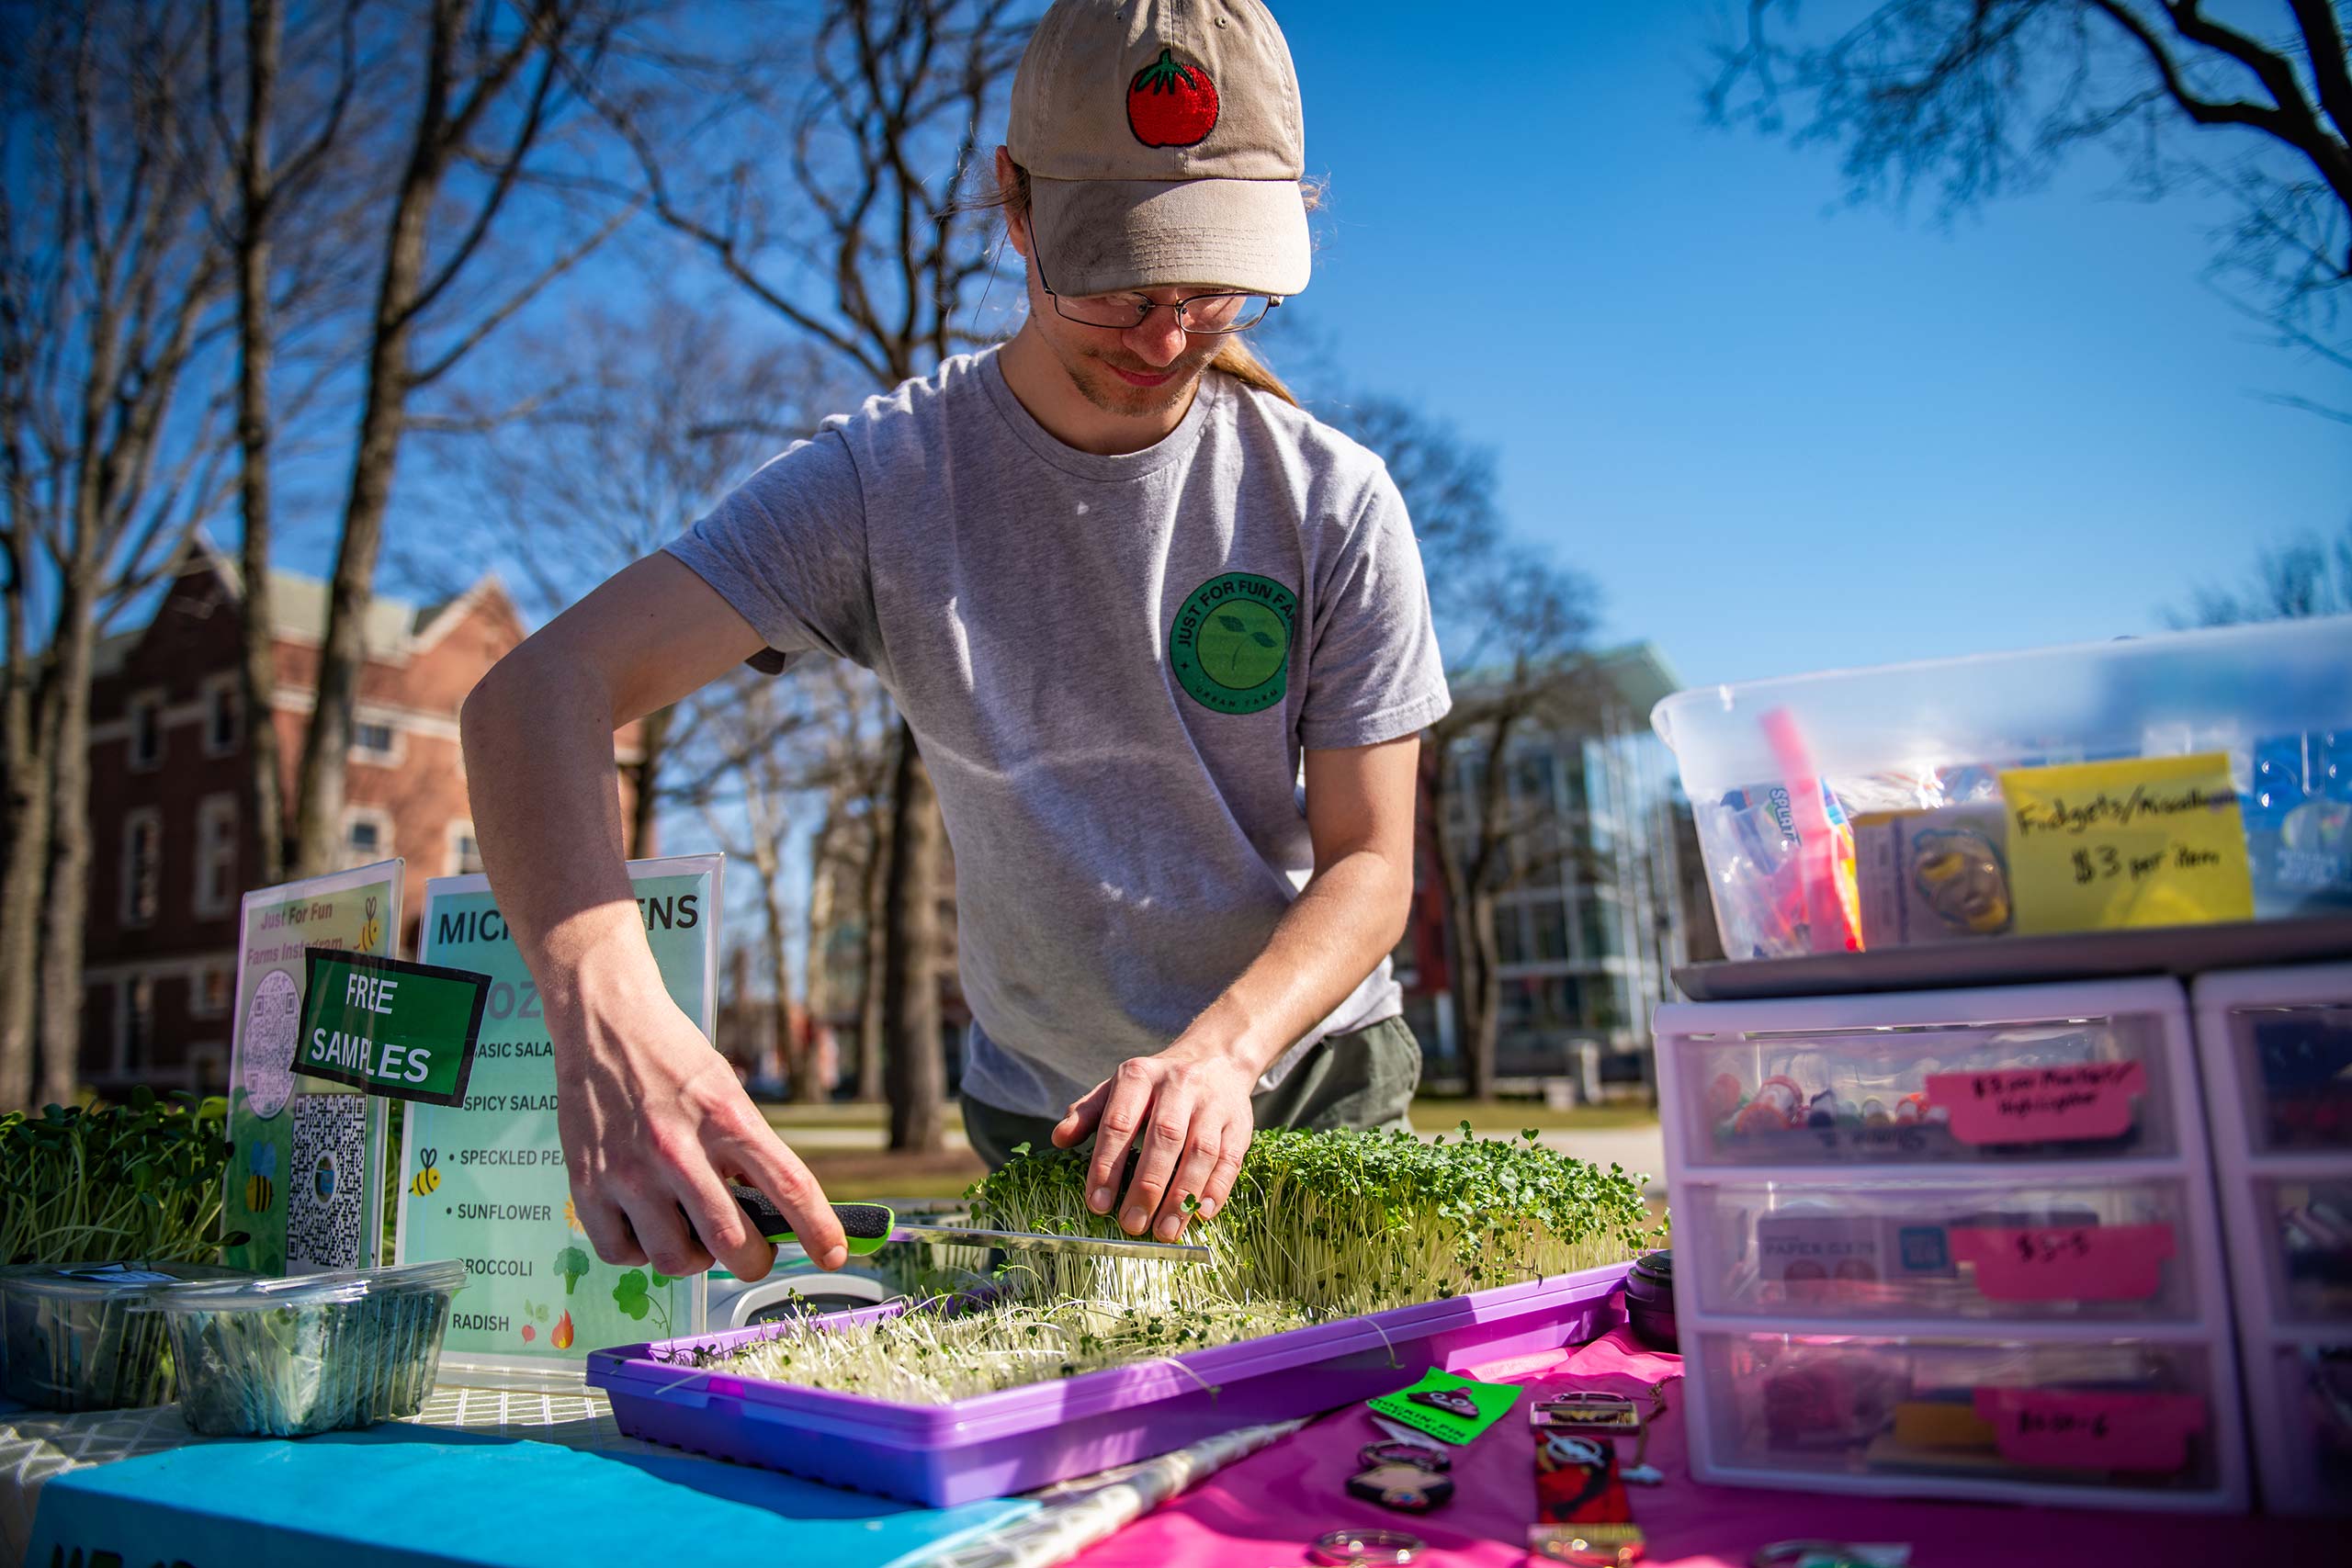 Owen Chase sells microgreens at a recent Ƶ Collective Pop-Up in Red Square.